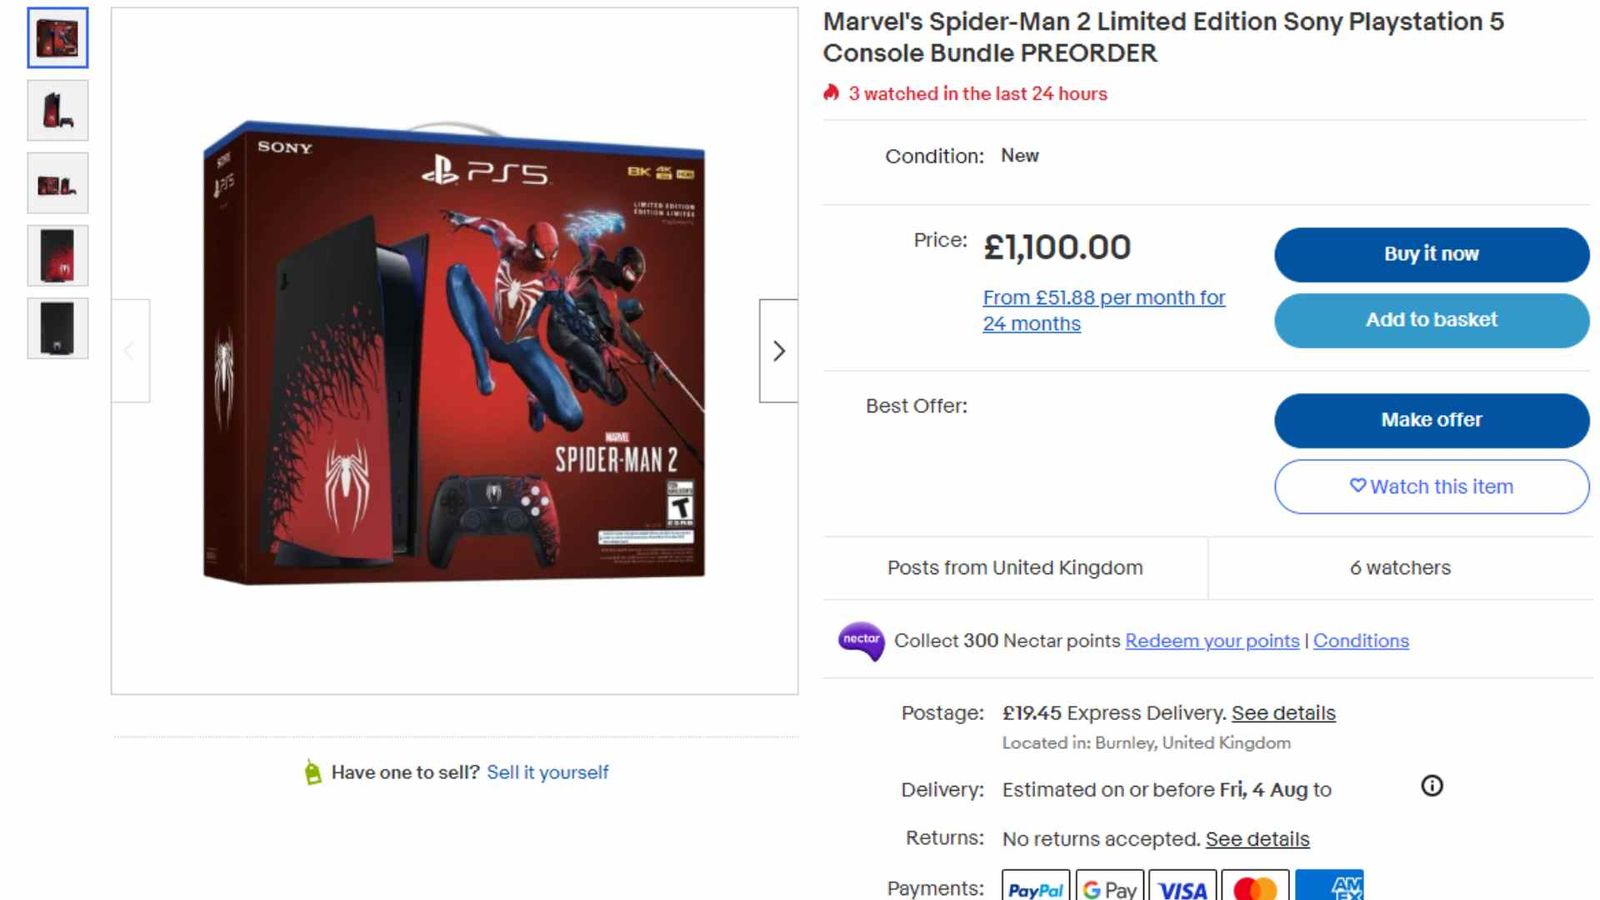 An ebay listing of the Spider-Man 2 PS5 Limited Edition console with a scalper pricing of £1,100